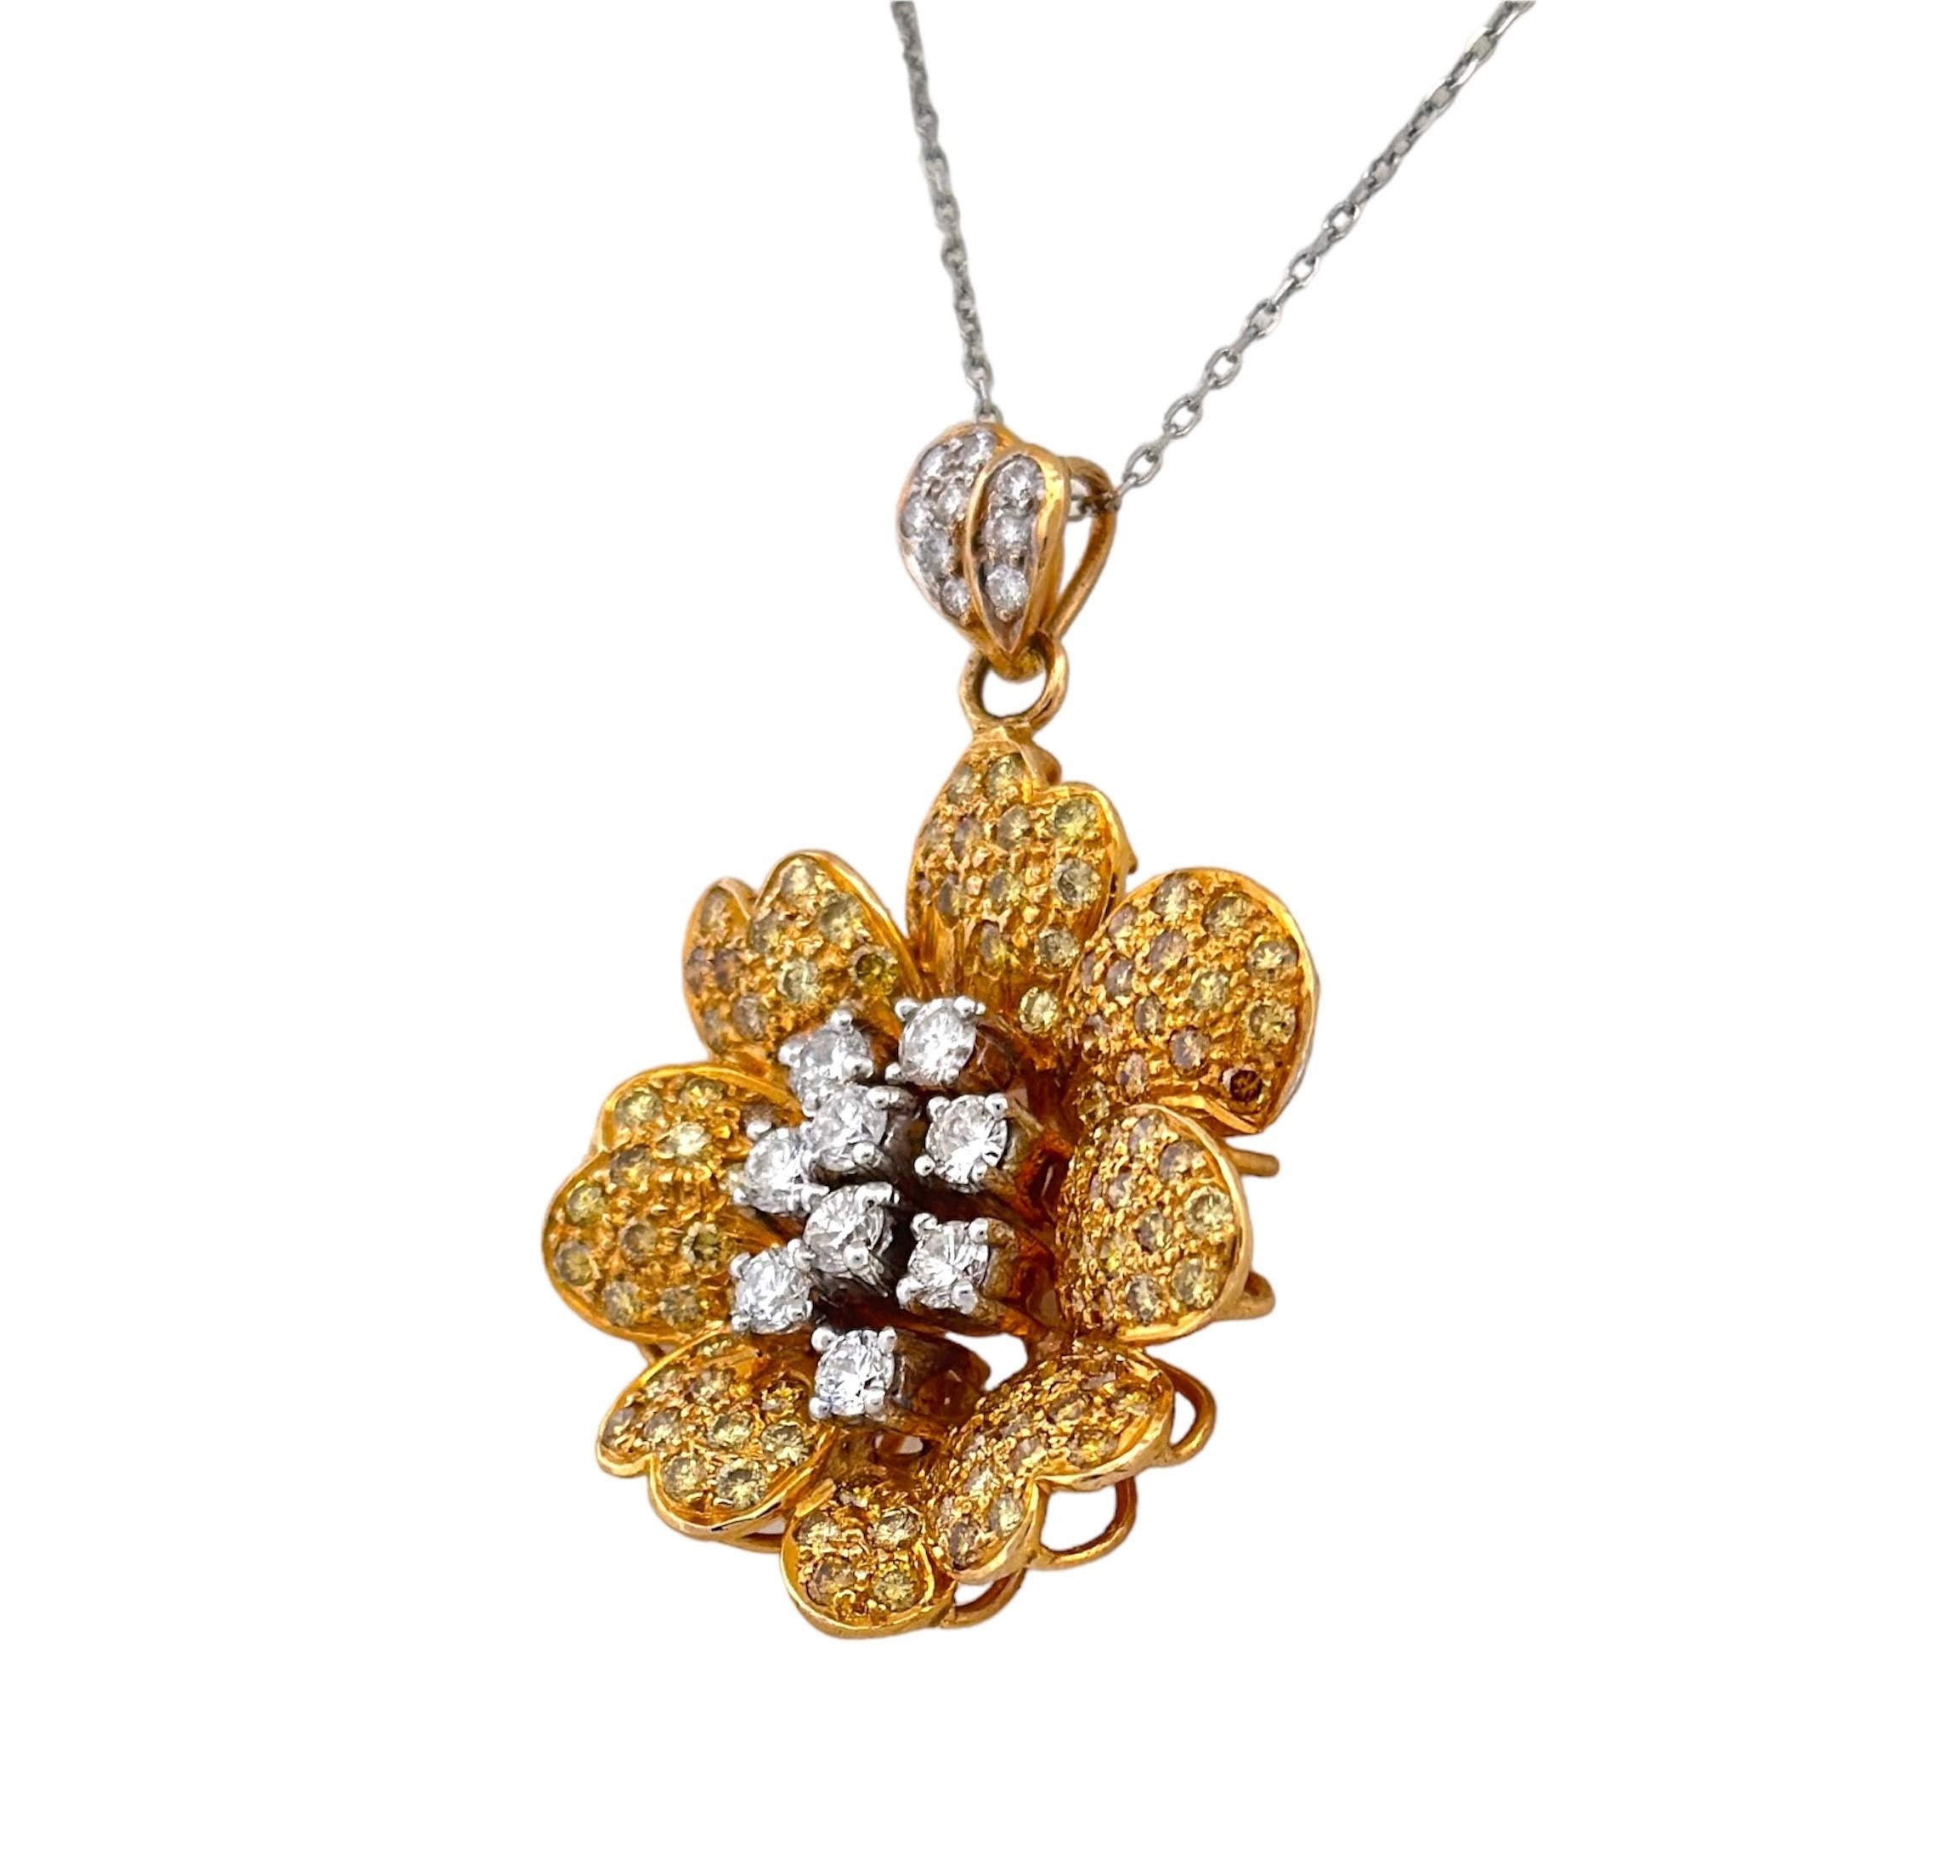 Step back in time to the 20th century and experience the opulence of this Yellow and White Diamond Flower Pendant. The focal point is graced by immaculate white diamonds, encircled by a dainty halo of lively yellow diamonds, resulting in a stunning